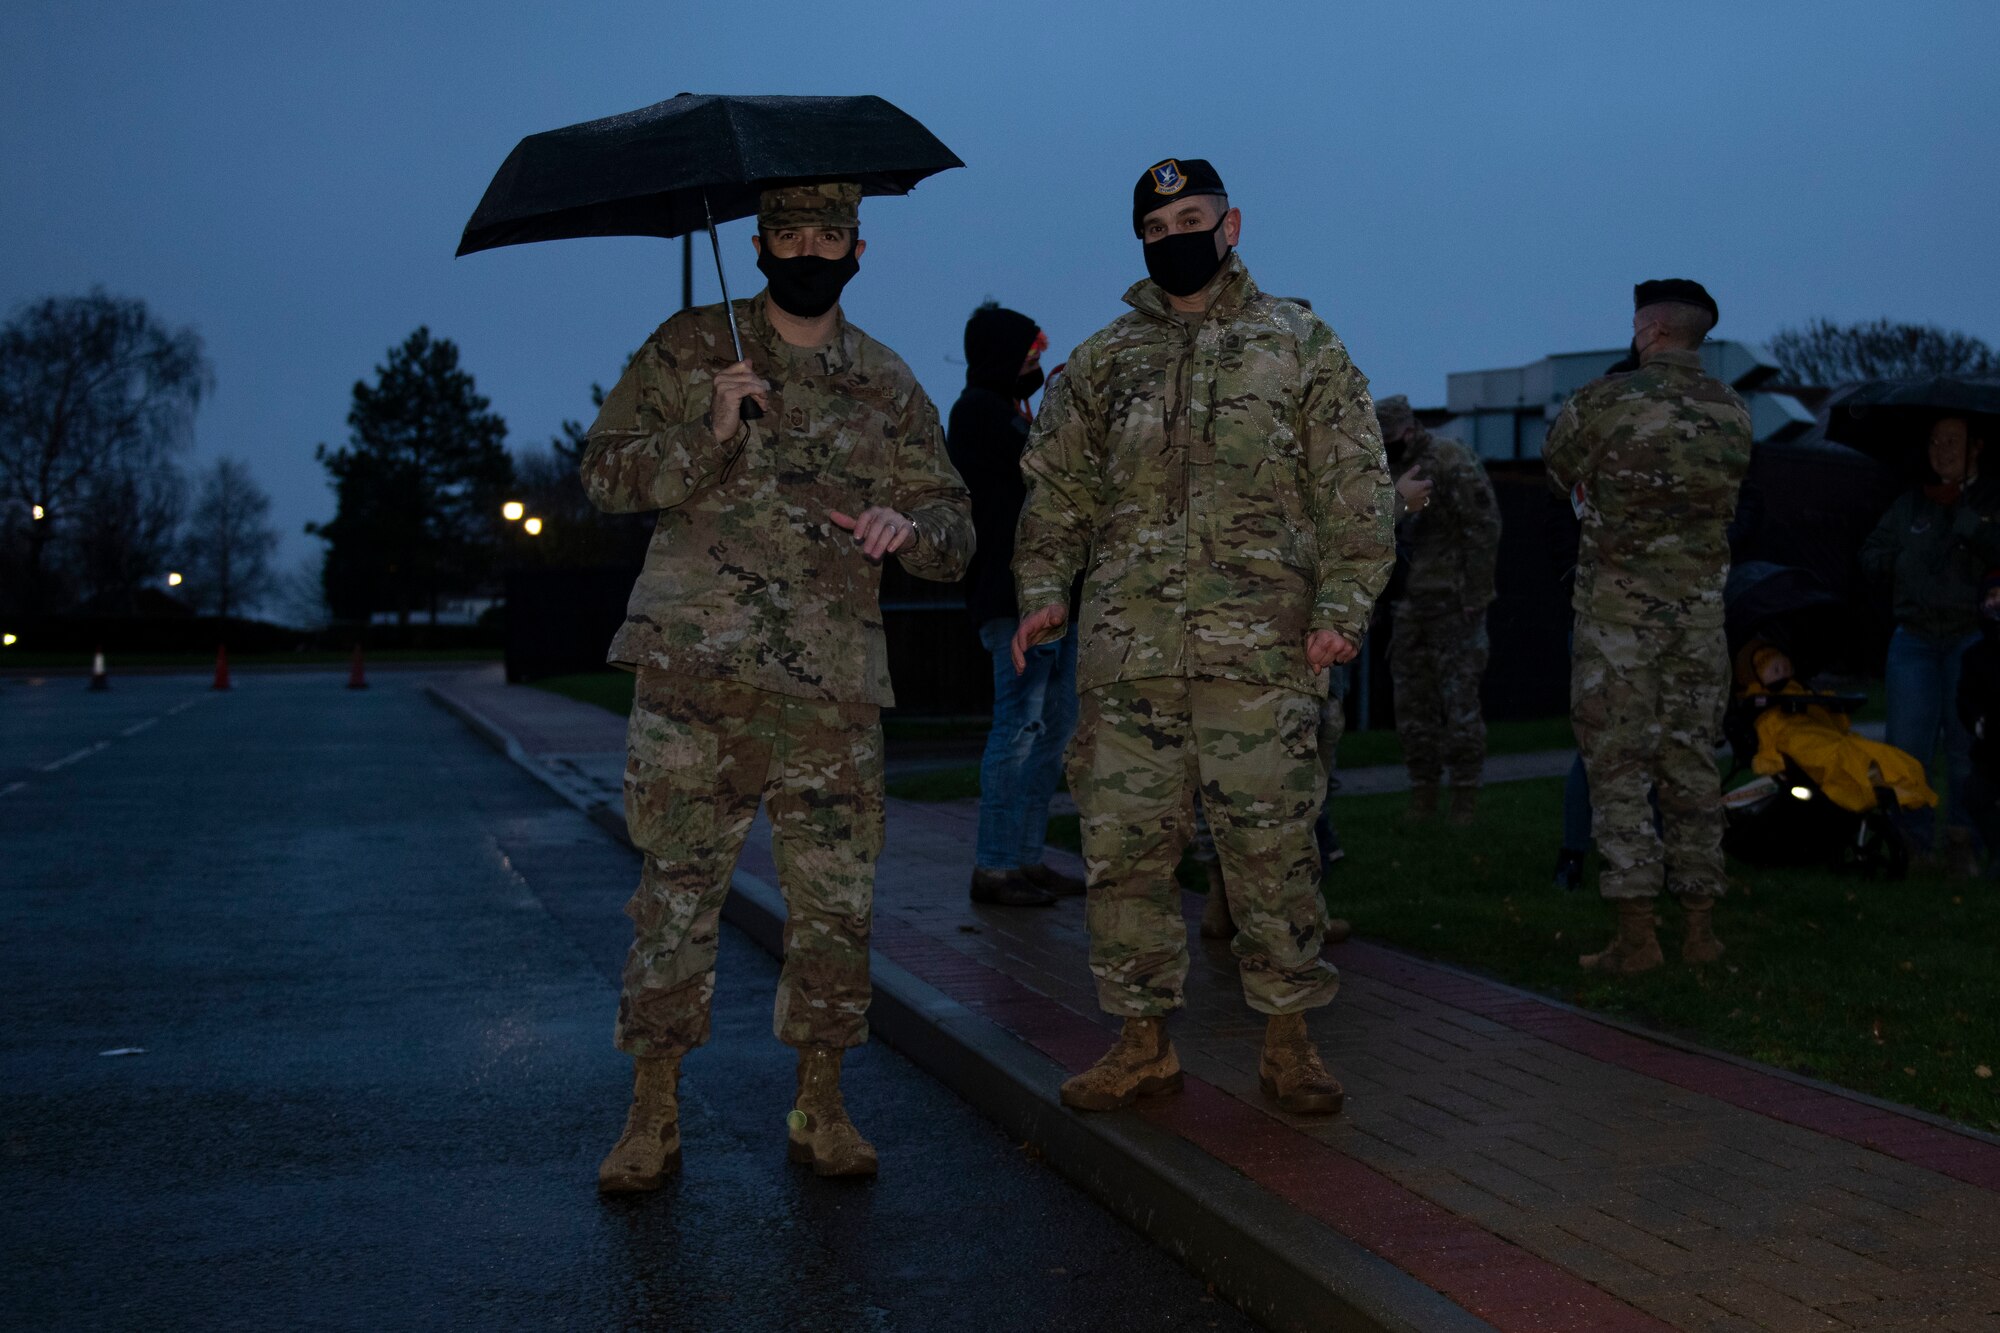 U.S. Army Col. Brian Dunmire, right, U.S. Africa Command Directorate for Intelligence at RAF Molesworth multi-service commander, and U.S. Air Force Chief Master Sgt. Dan Spencer, left, AFRICOM senior enlisted leader, pose for a photo at a tree lighting ceremony at RAF Alconbury, England, Dec. 4, 2020. Col. Kurt Wendt, 501 CSW commander, and Chief Master Sgt. Daniel Keene, 501 CSW command chief, lit the tree with Santa Clause. (U.S. Air Force photo by Senior Airman Jennifer Zima)